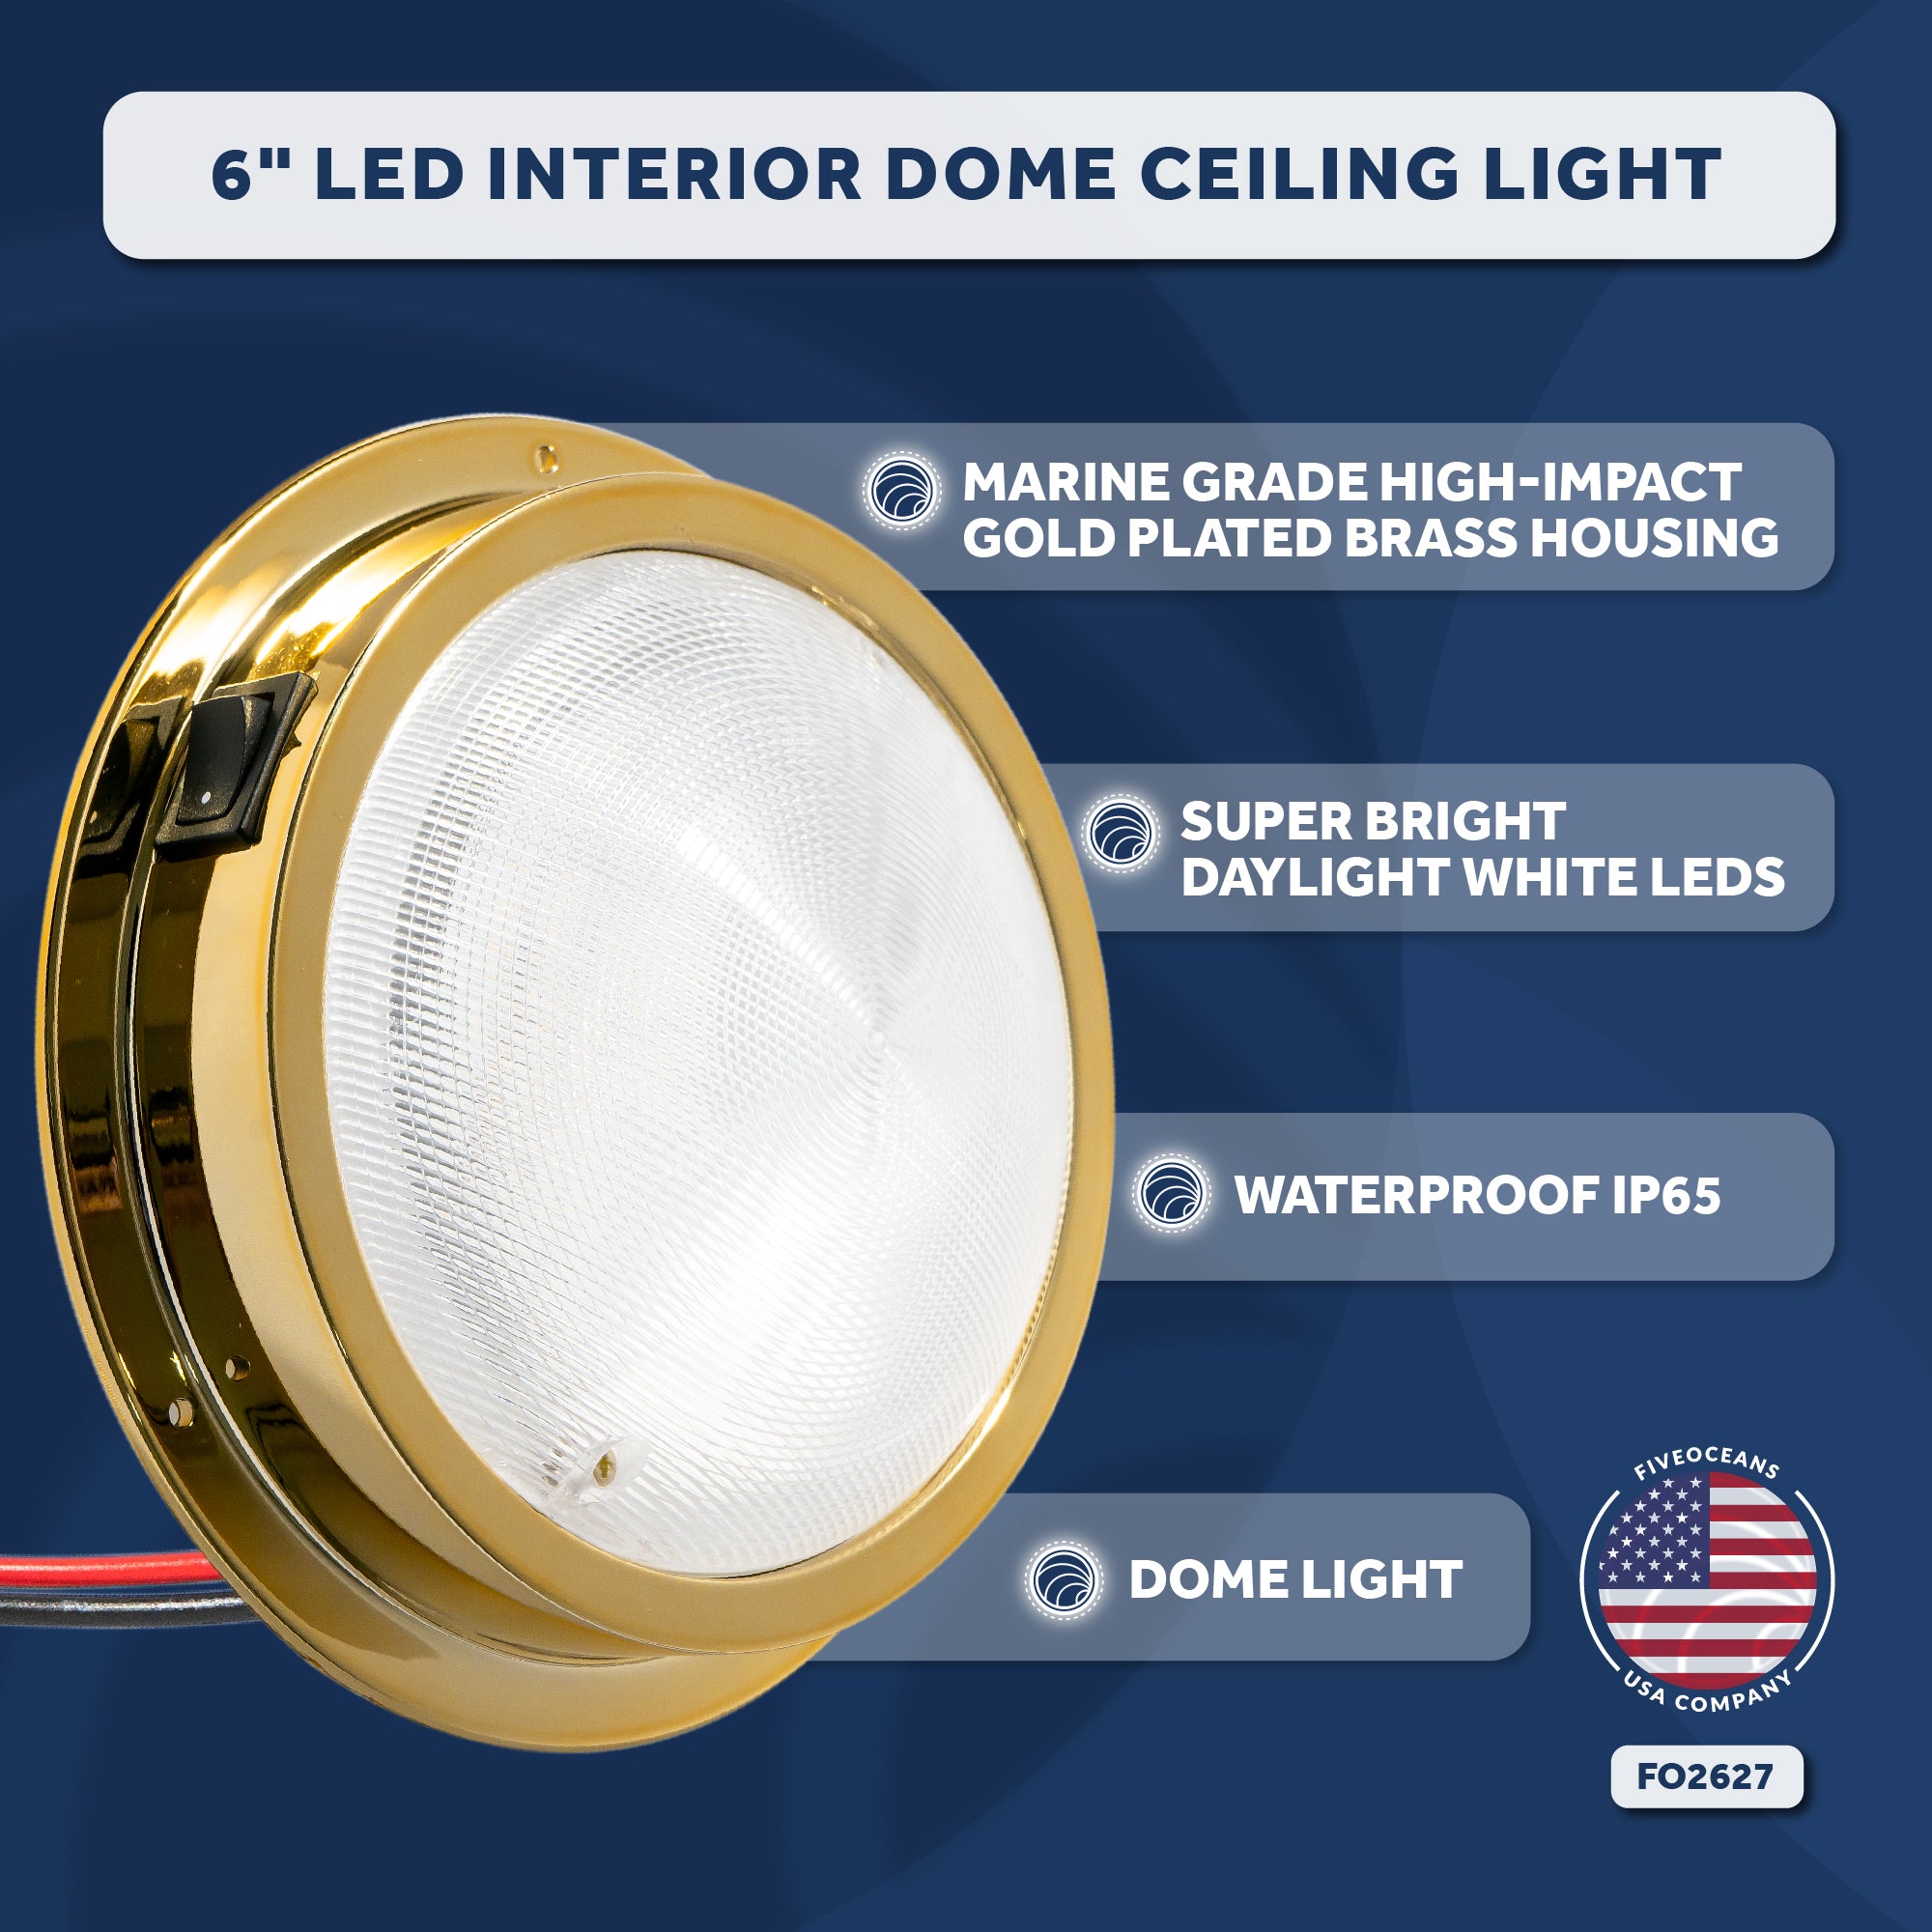 LED Interior Dome Ceiling Light, 6" Surface Mount, Daylight White - FO2627